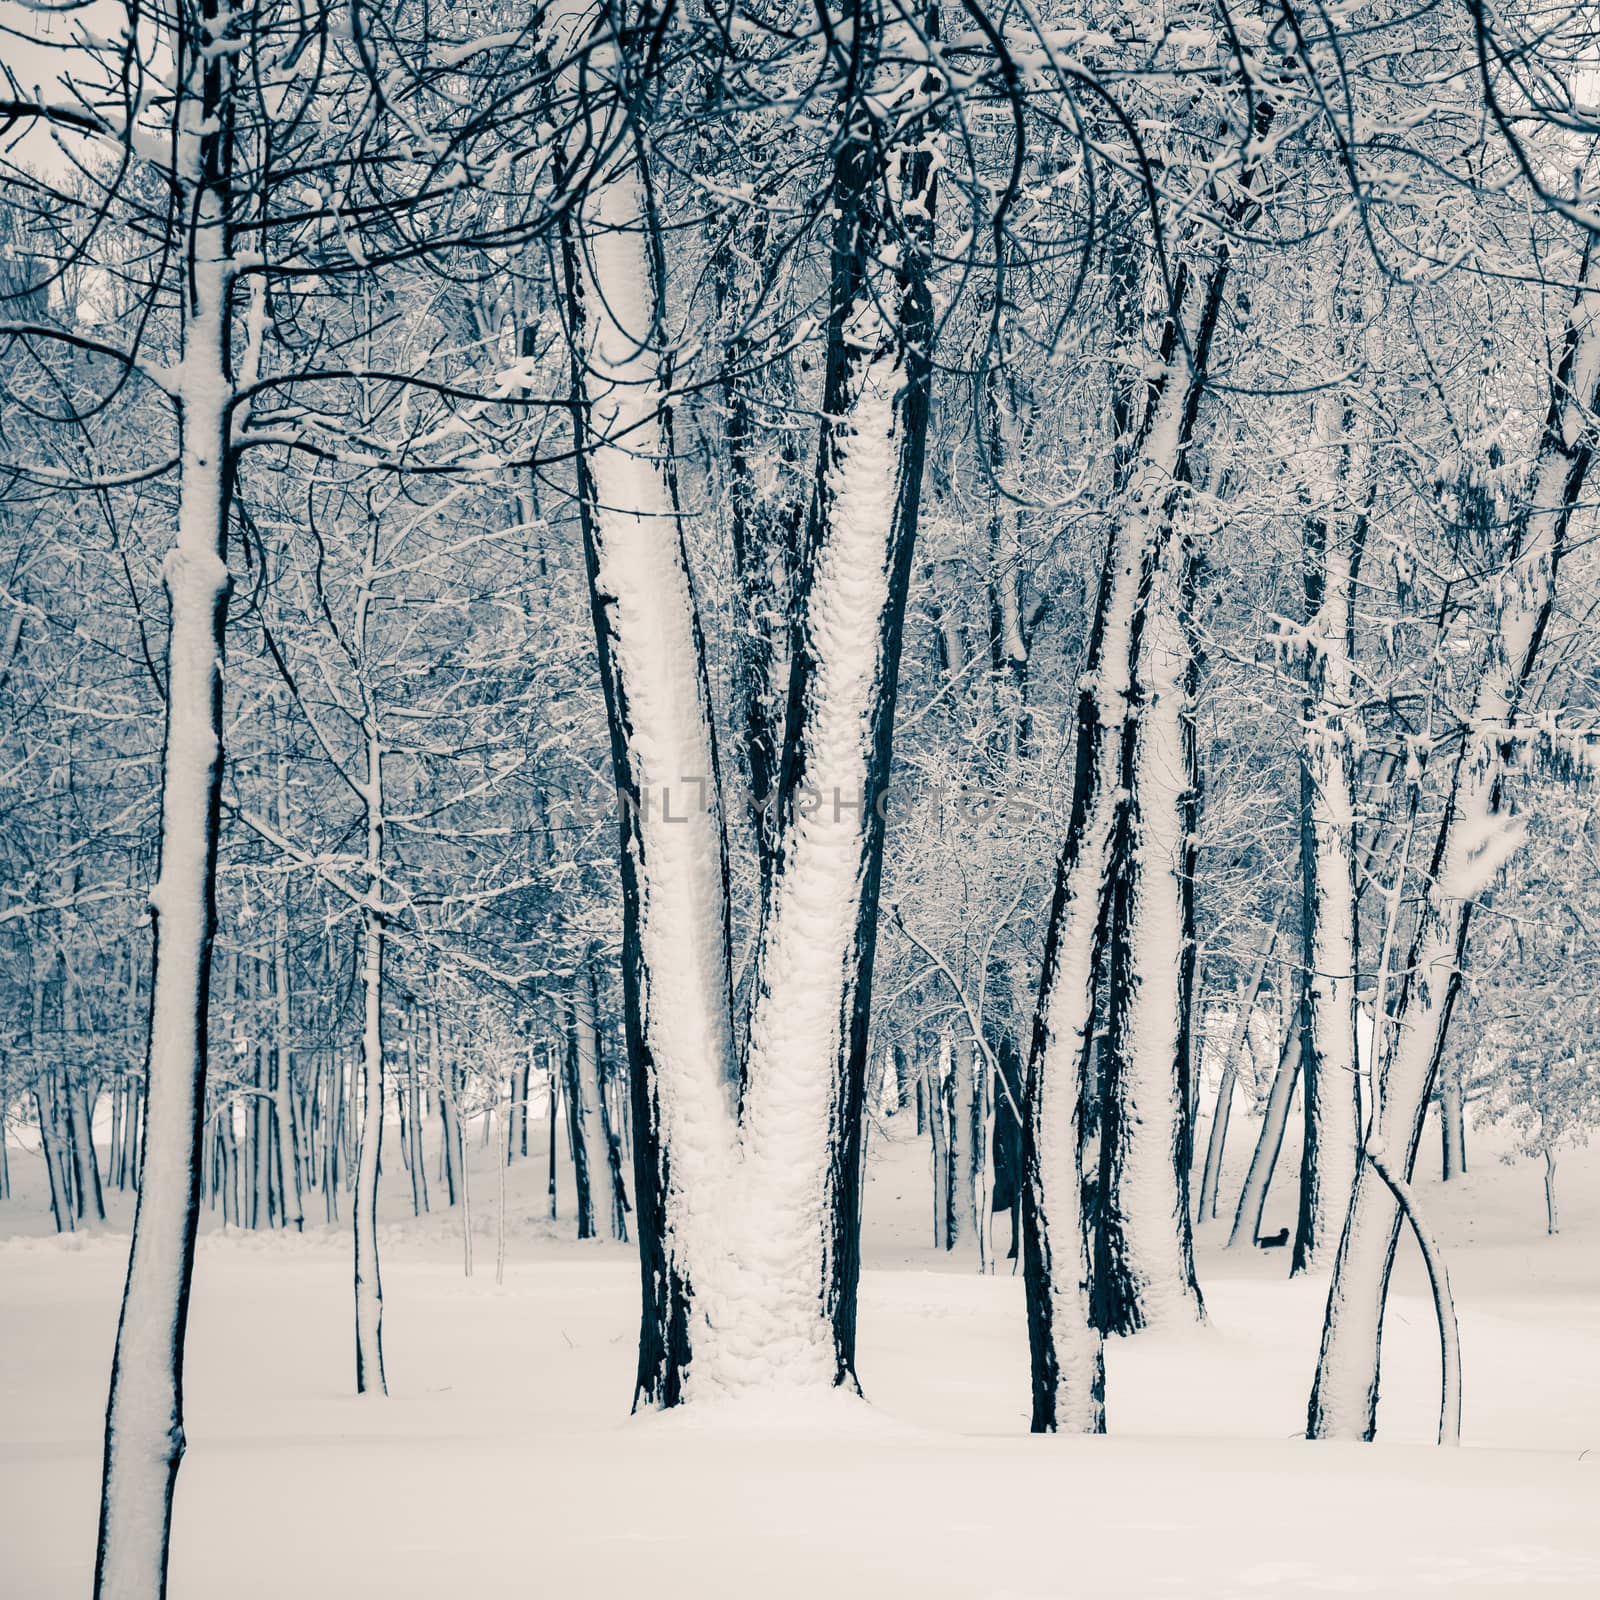 Trees in the Natalka park, close to the Dnieper river in Kiev, Ukraine. One side of the trees is covered by snow, while the other part stays untouched